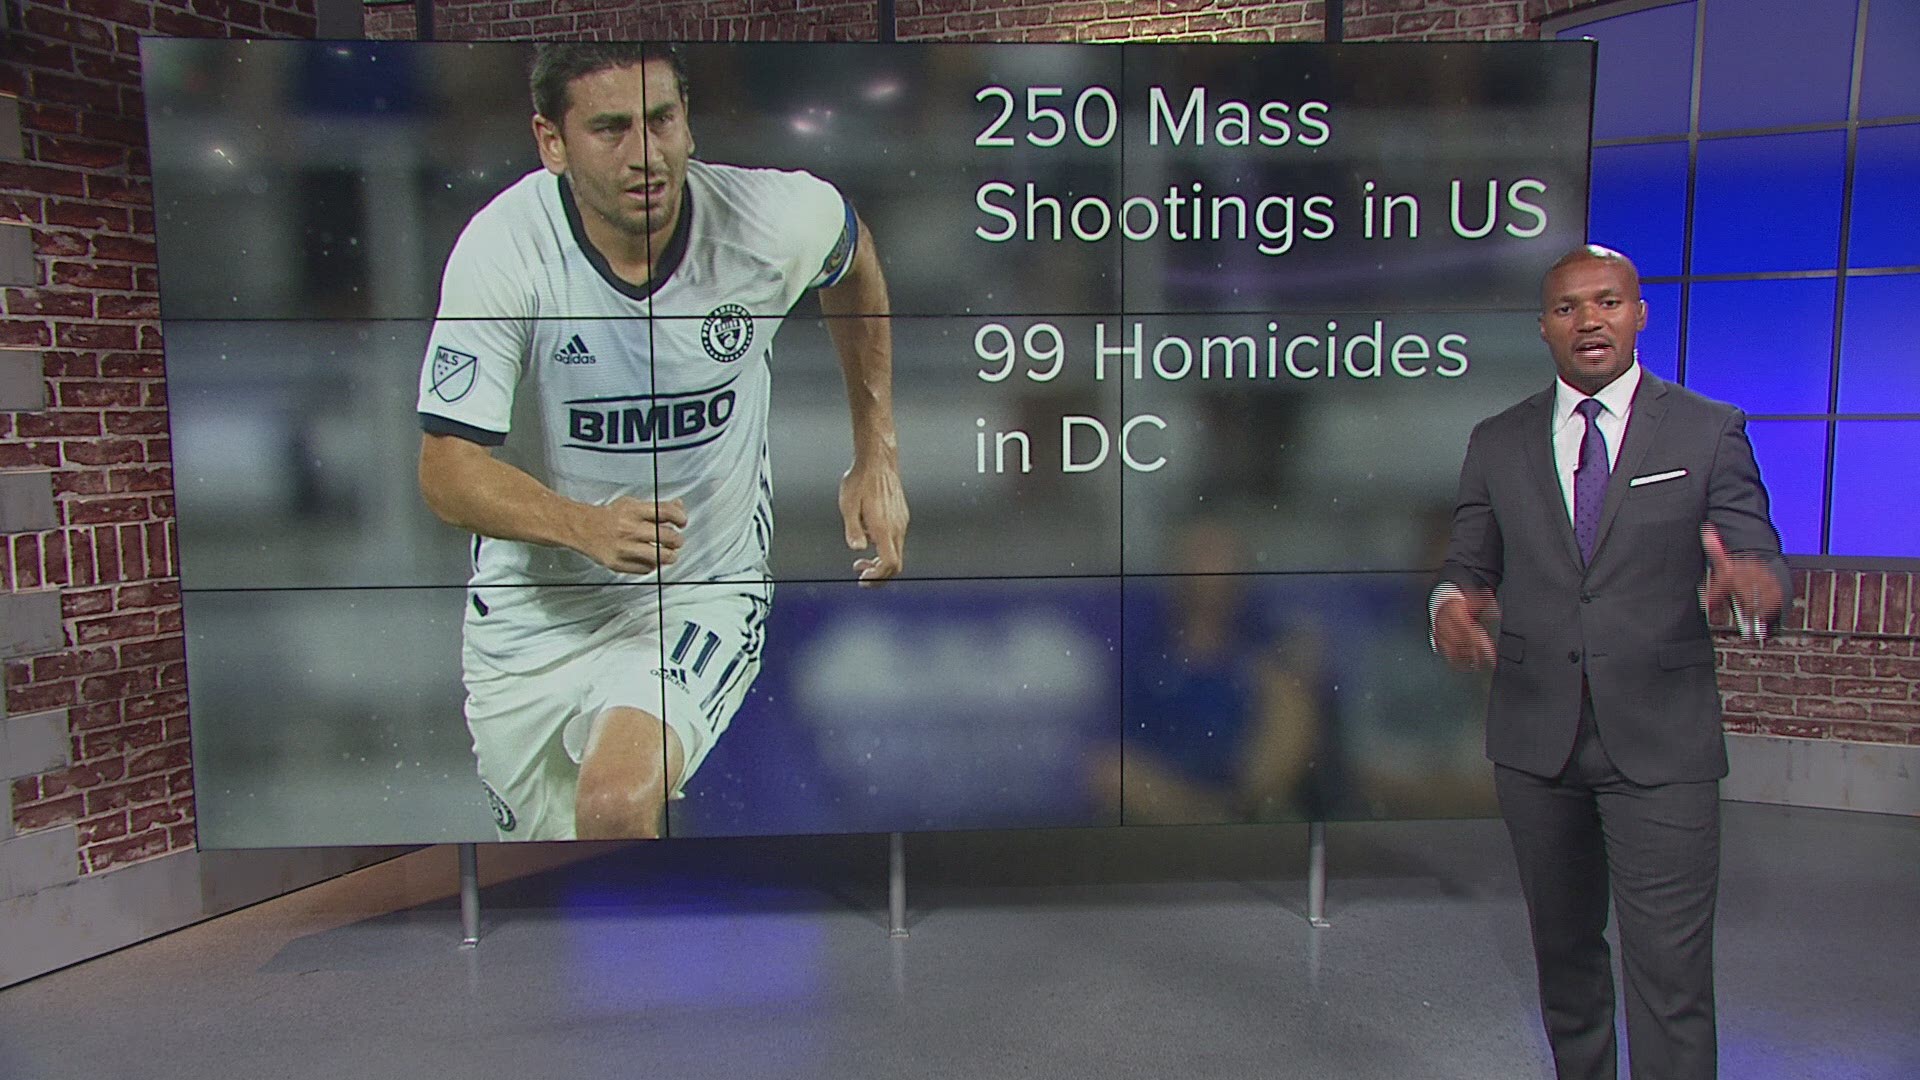 Sports Director Darren M. Haynes gives his take after the Philadelphia Union's Alejandro Bedoya called out Congress after the latest mass shootings.